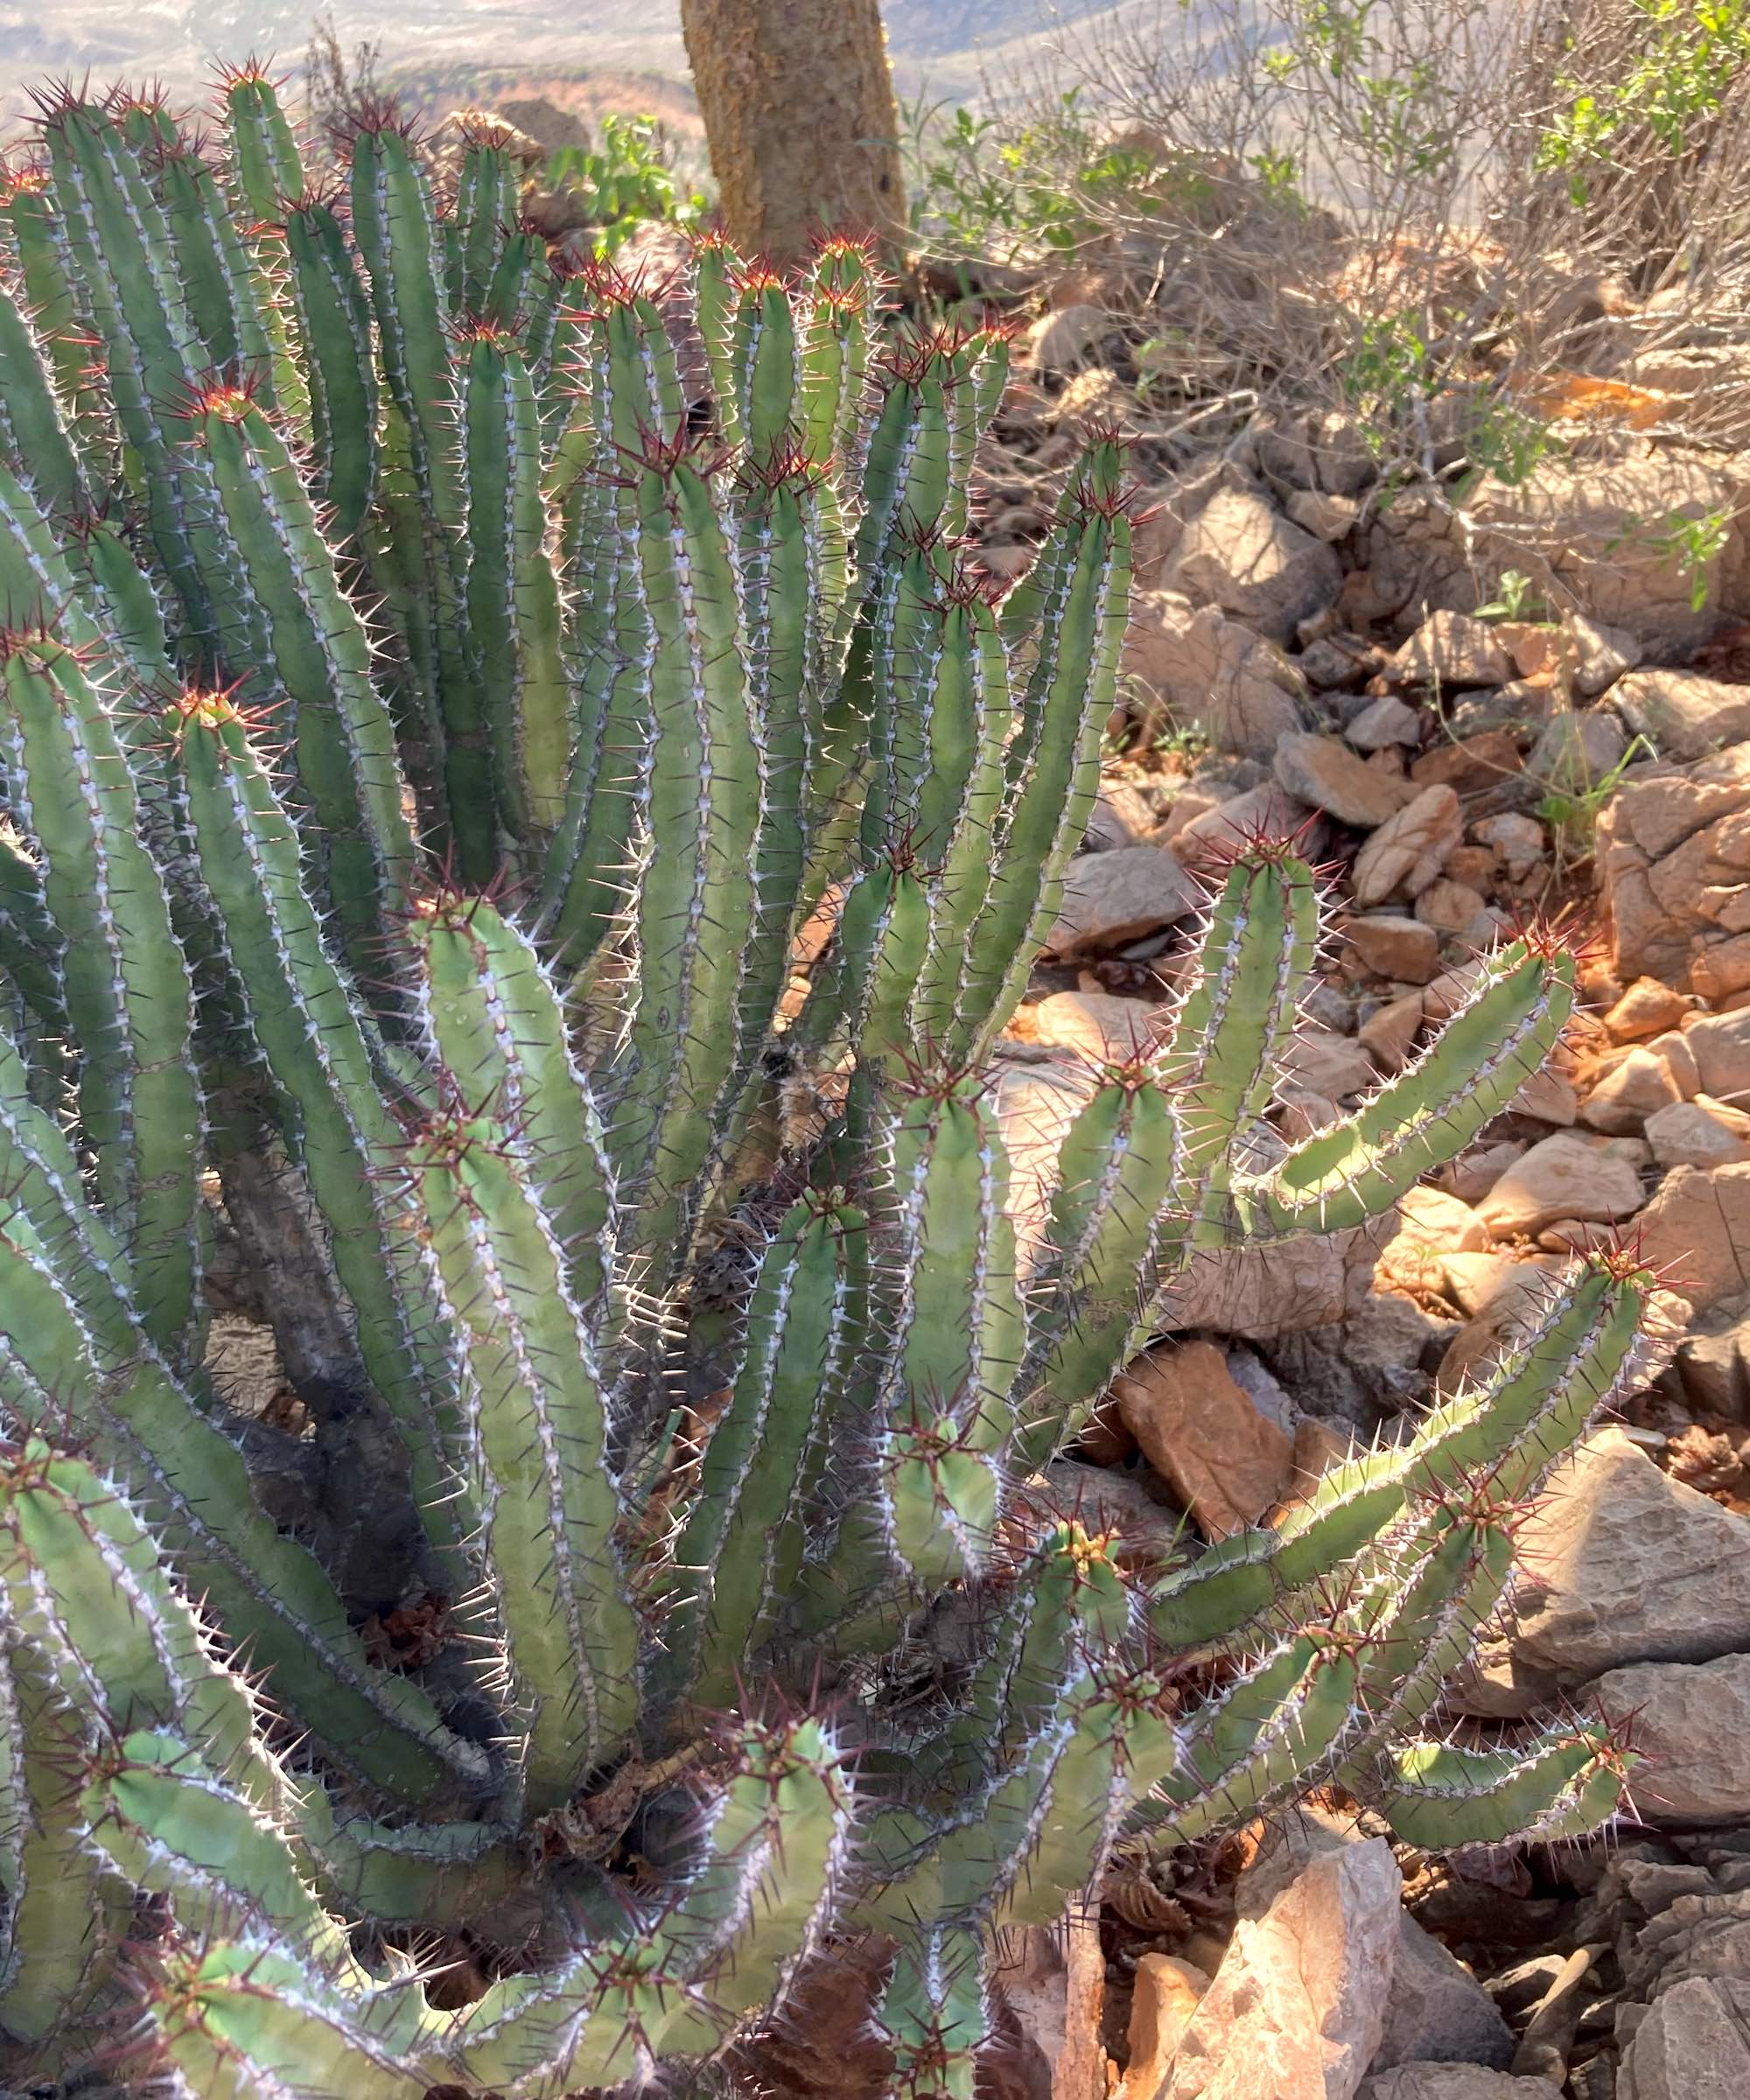 A cactus like plant growing from rocky ground.